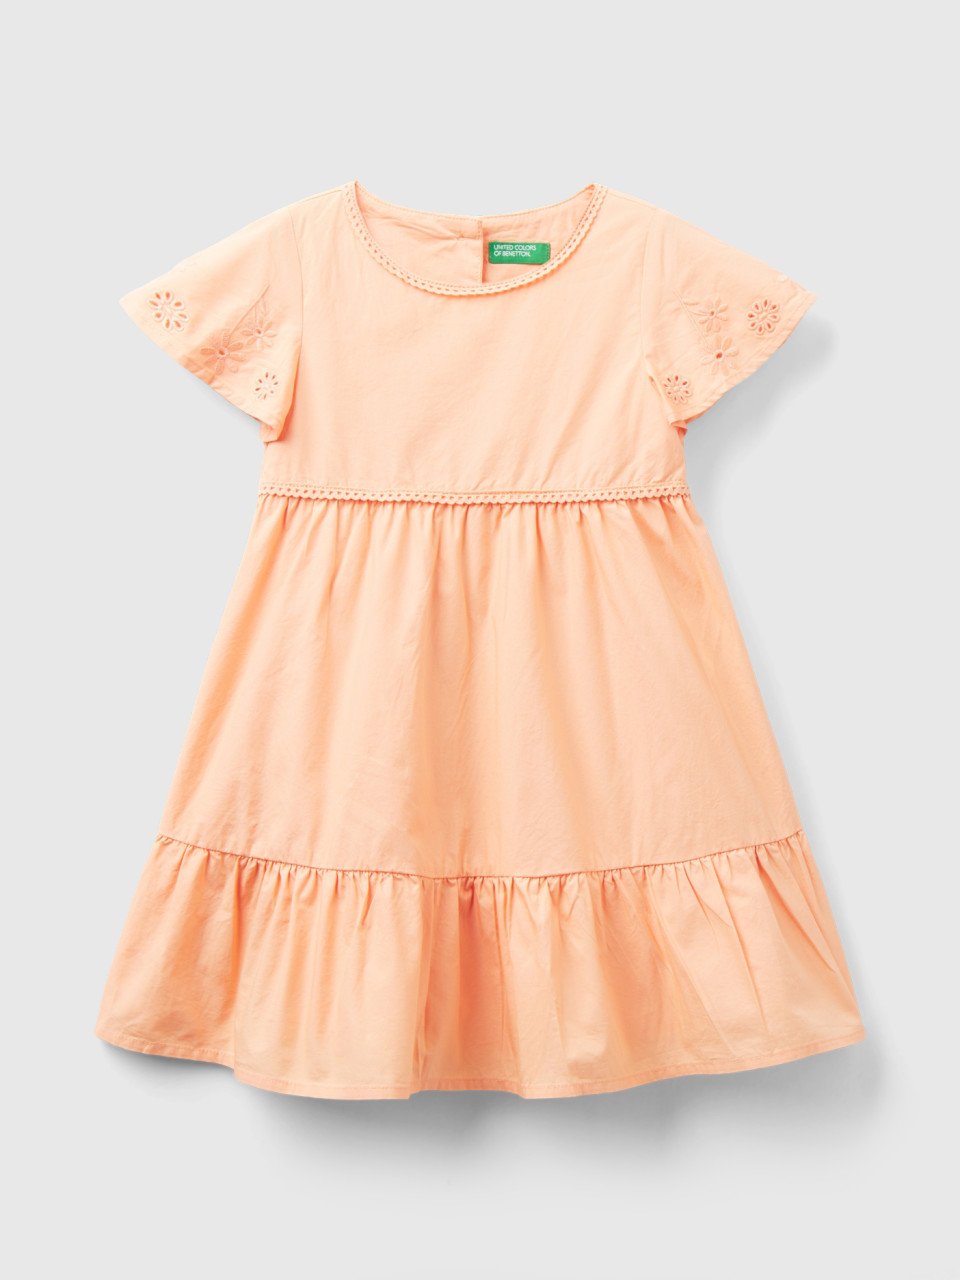 Benetton, Dress With Embroidery And Frill, Peach, Kids